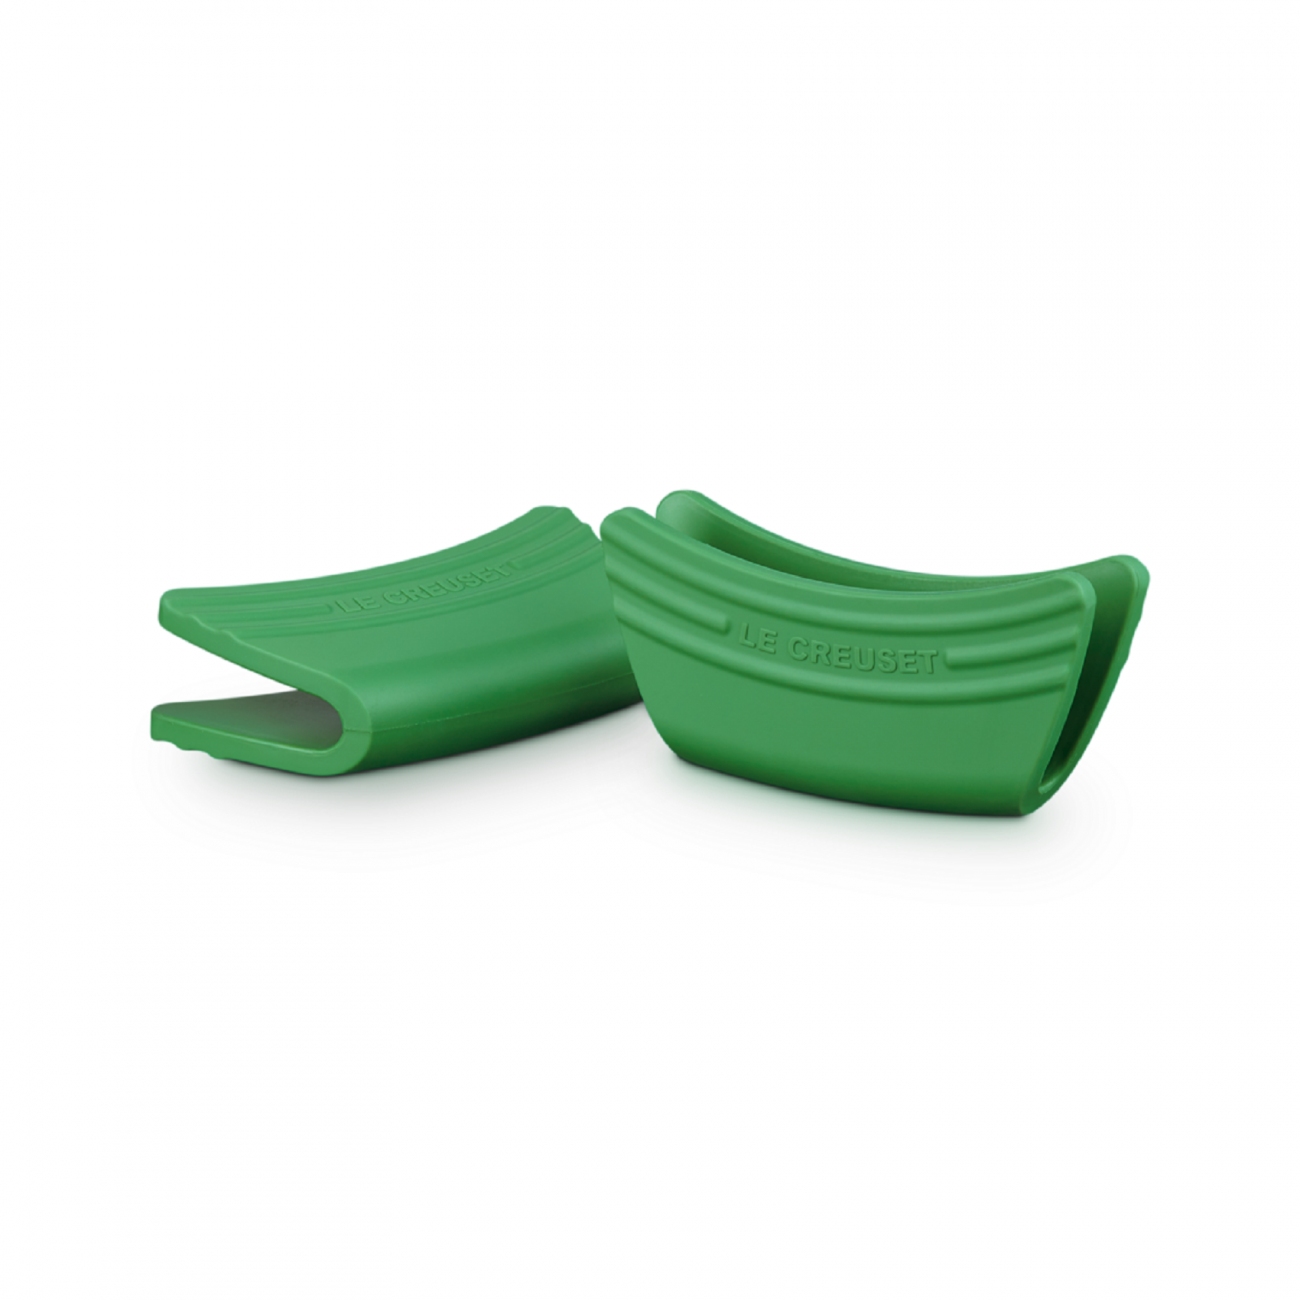 Le Creuset Set of 2 Handle Grips Bamboo Green